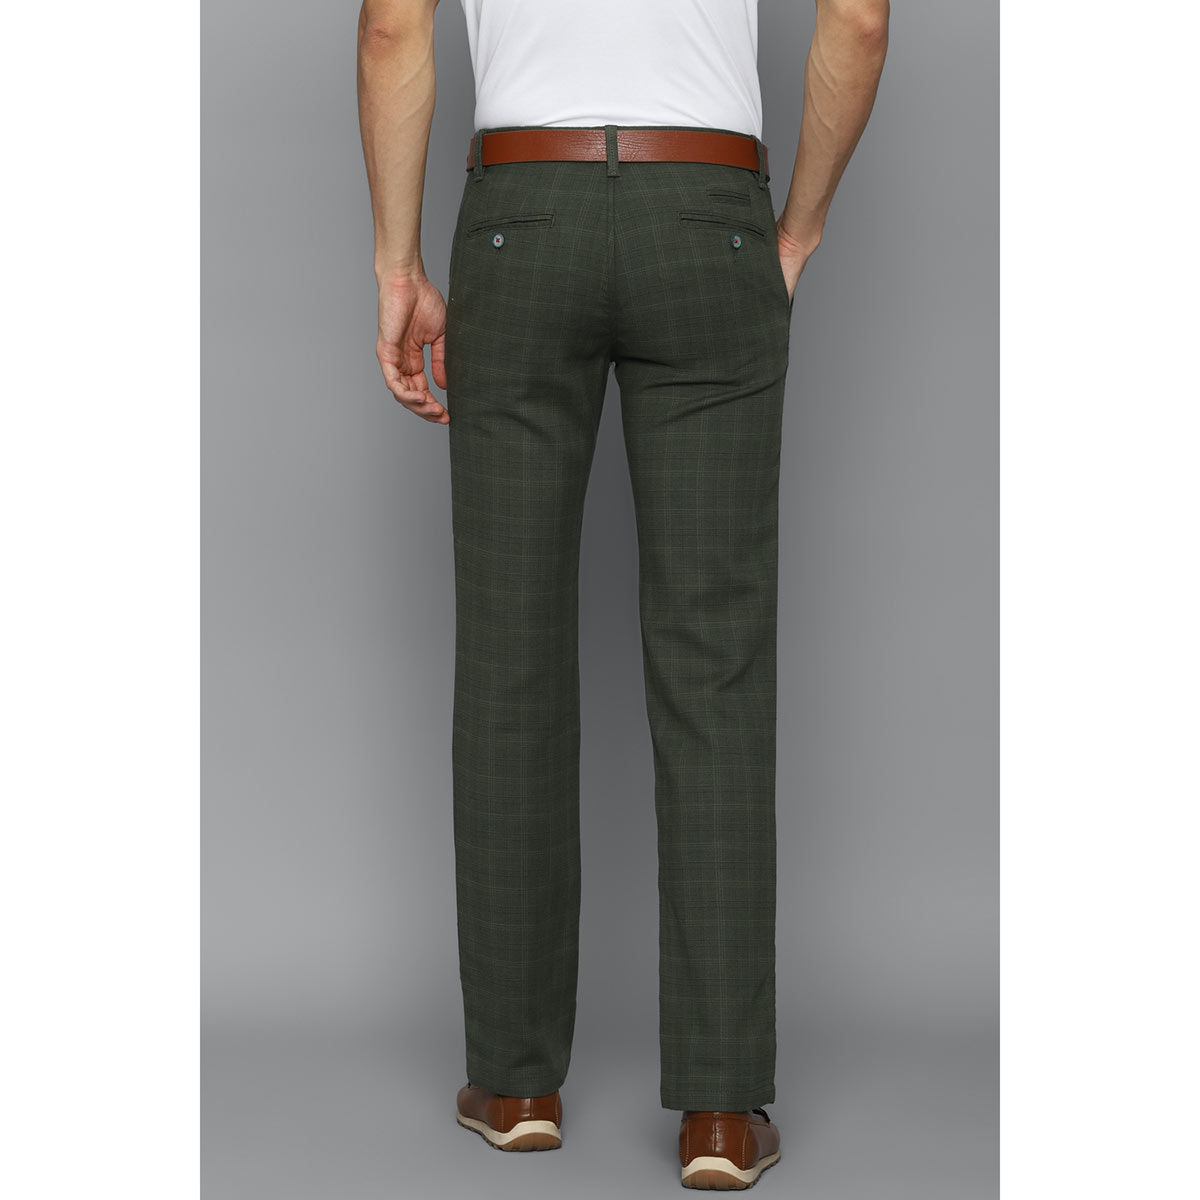 Louis Philippe Men Grey Slim Formal Trousers Buy Louis Philippe Men Grey  Slim Formal Trousers Online at Best Price in India  NykaaMan